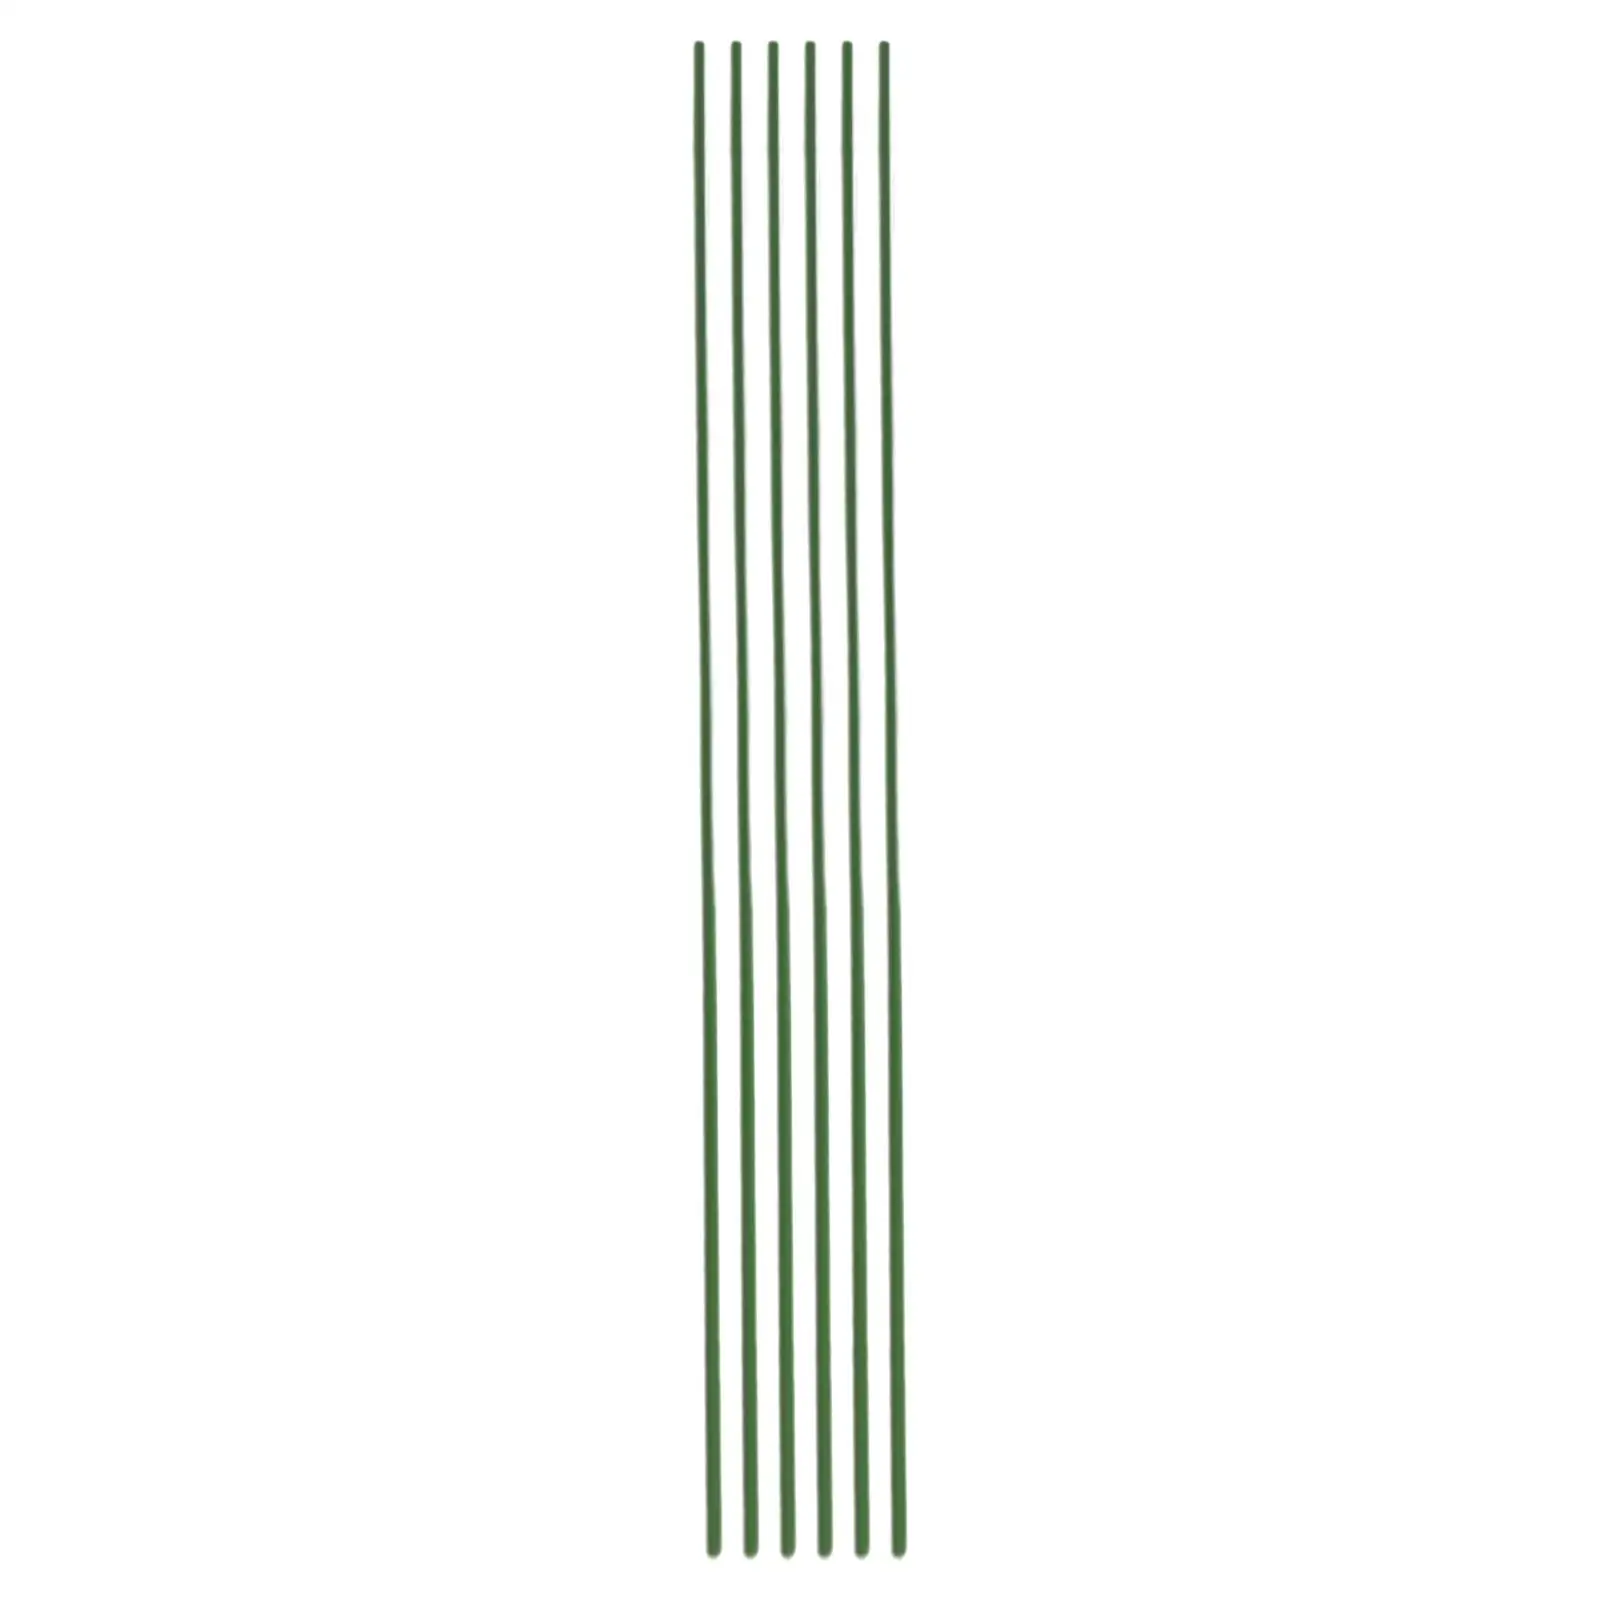 6x Plant Ties Green 3.2mm Flower Tie Wires for Home Organization Indoor Plants Bouquet Stem Wrap Climbing Plants Outdoor Plants